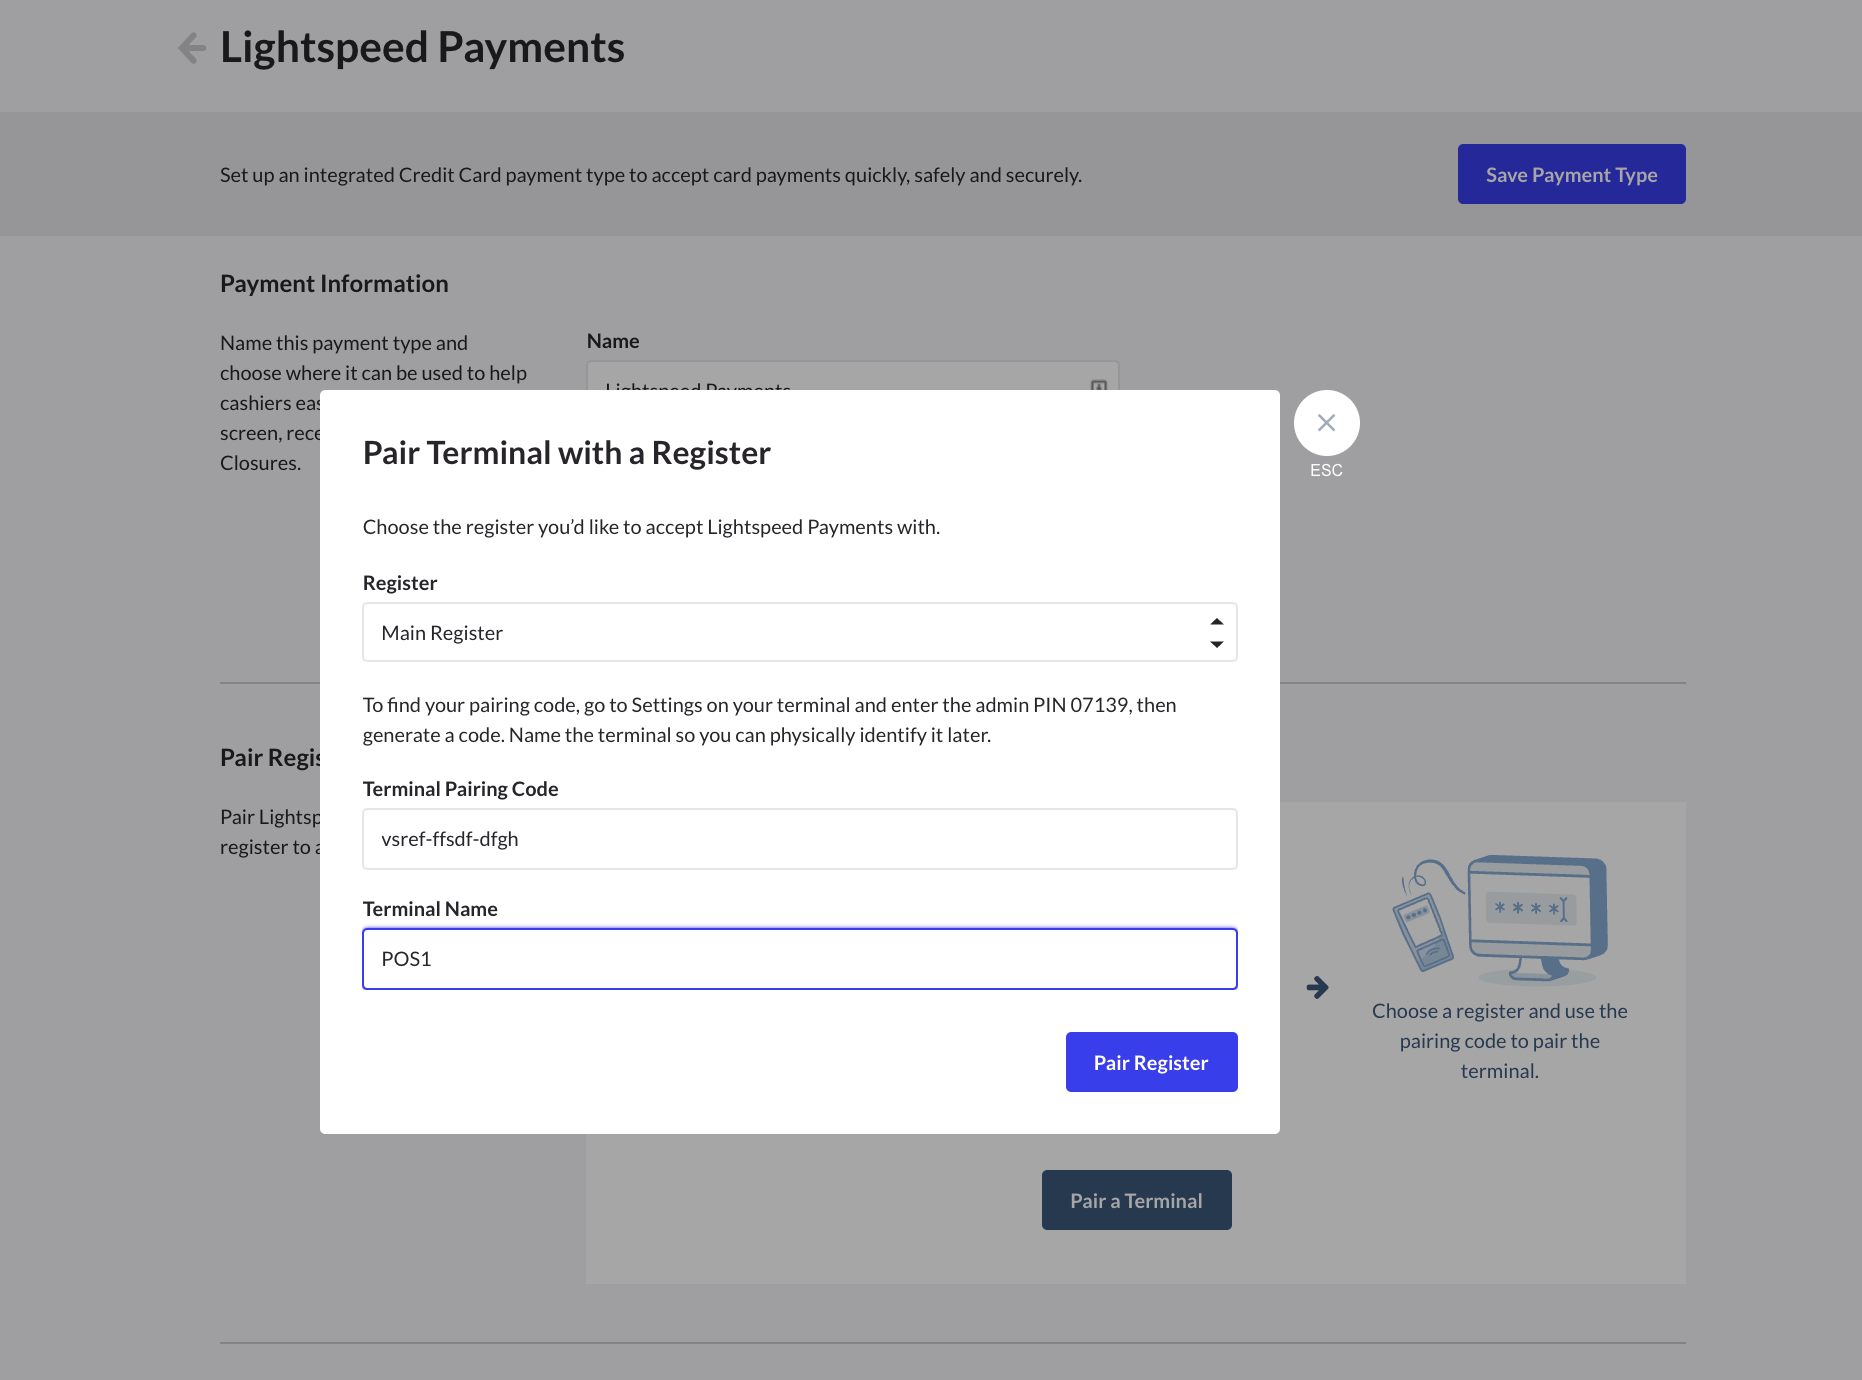 Lightspeed payments pairing screen with fields to enter the terminal pairing code and the terminal name.